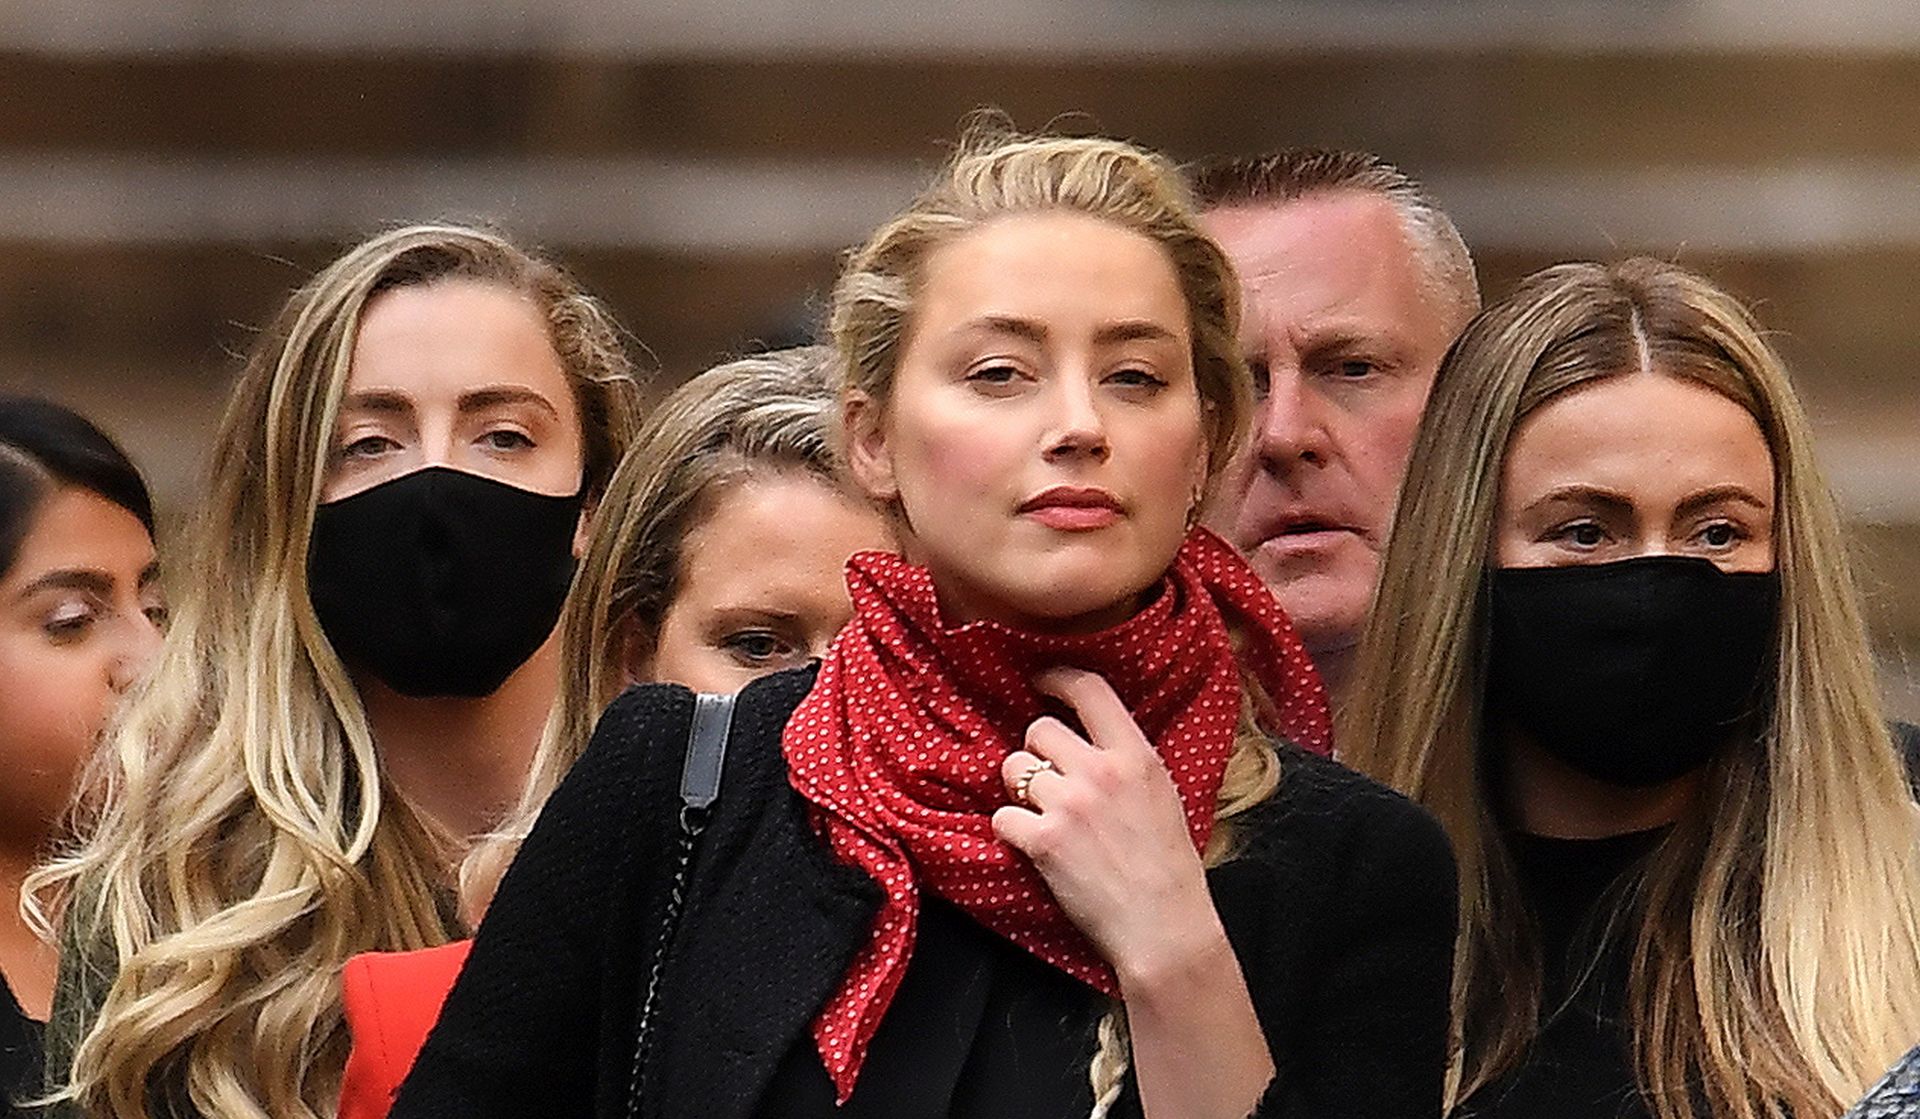 epa08543861 US actress Amber Heard (C) departs the Royal Courts of Justice with her legal team in London, Britain, 13 July 2020. Heard's ex-husband US actor Johnny Depp is suing The Sun's newspaper publisher News Group Newspapers (NGN) over claims he abused his ex-wife.  EPA/ANDY RAIN